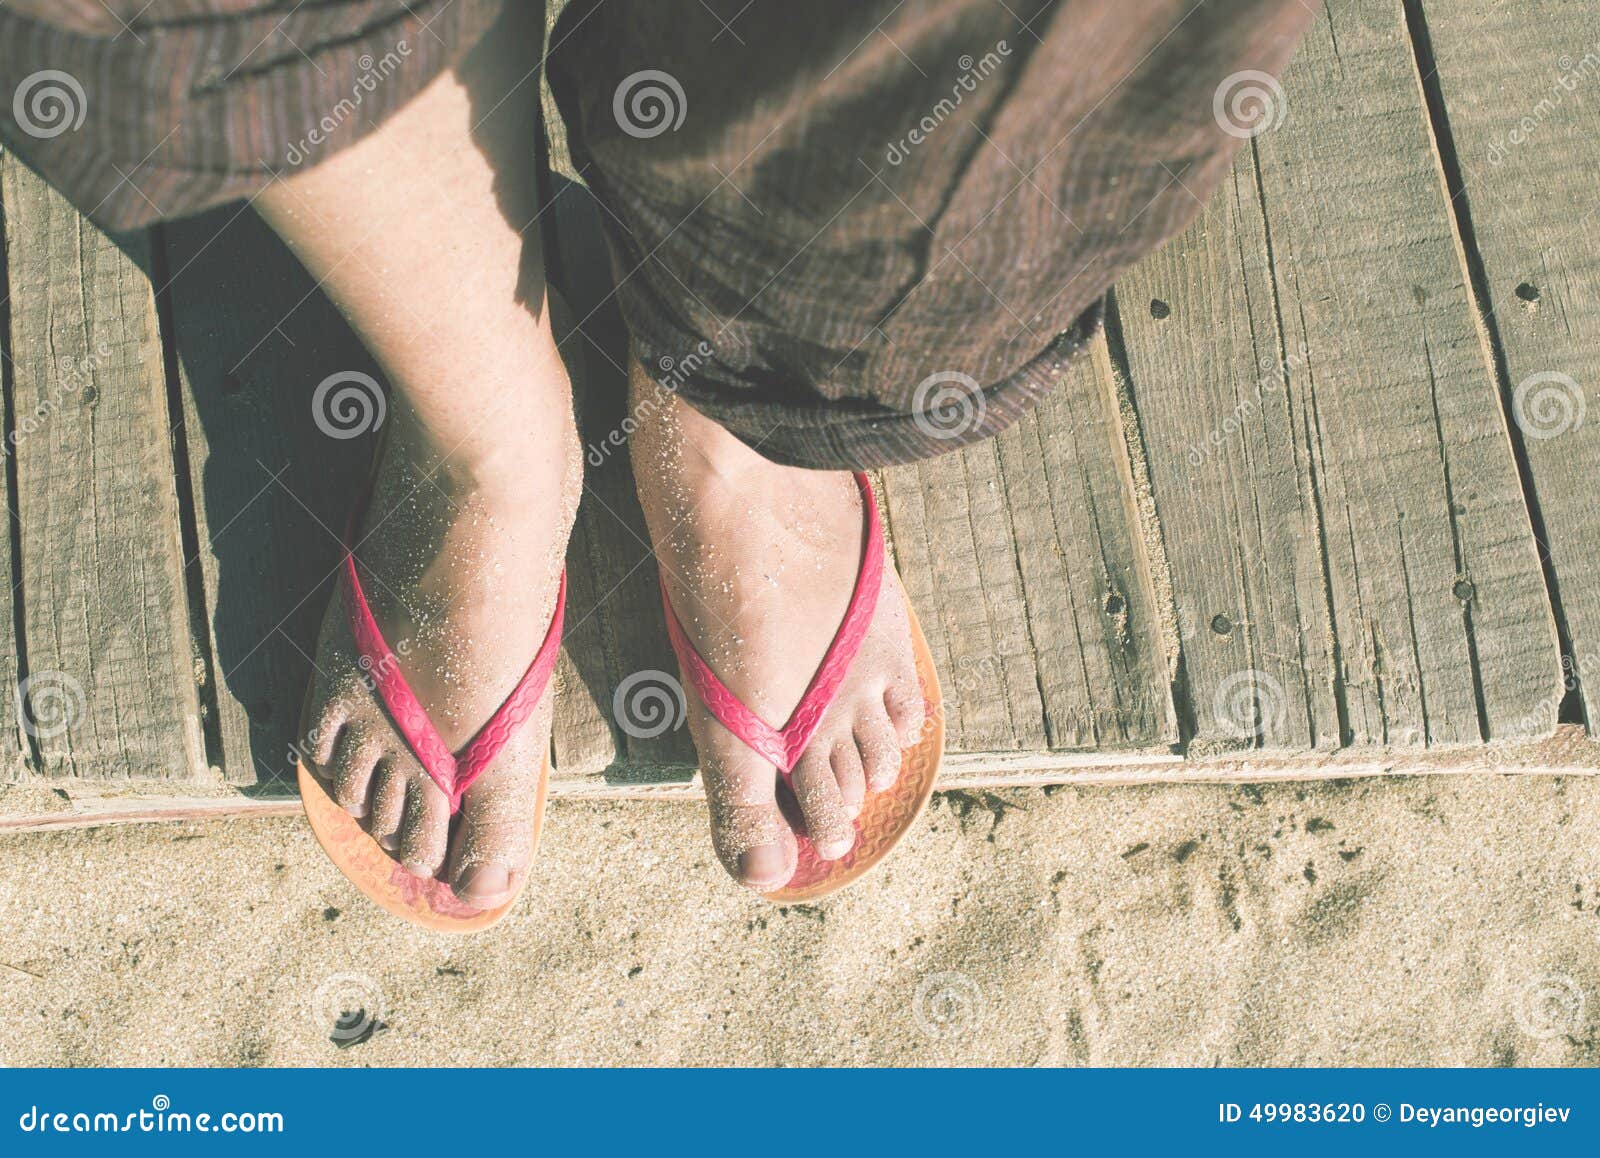 Foot in thongs stock photo. Image of relax, flops, sandals - 49983620